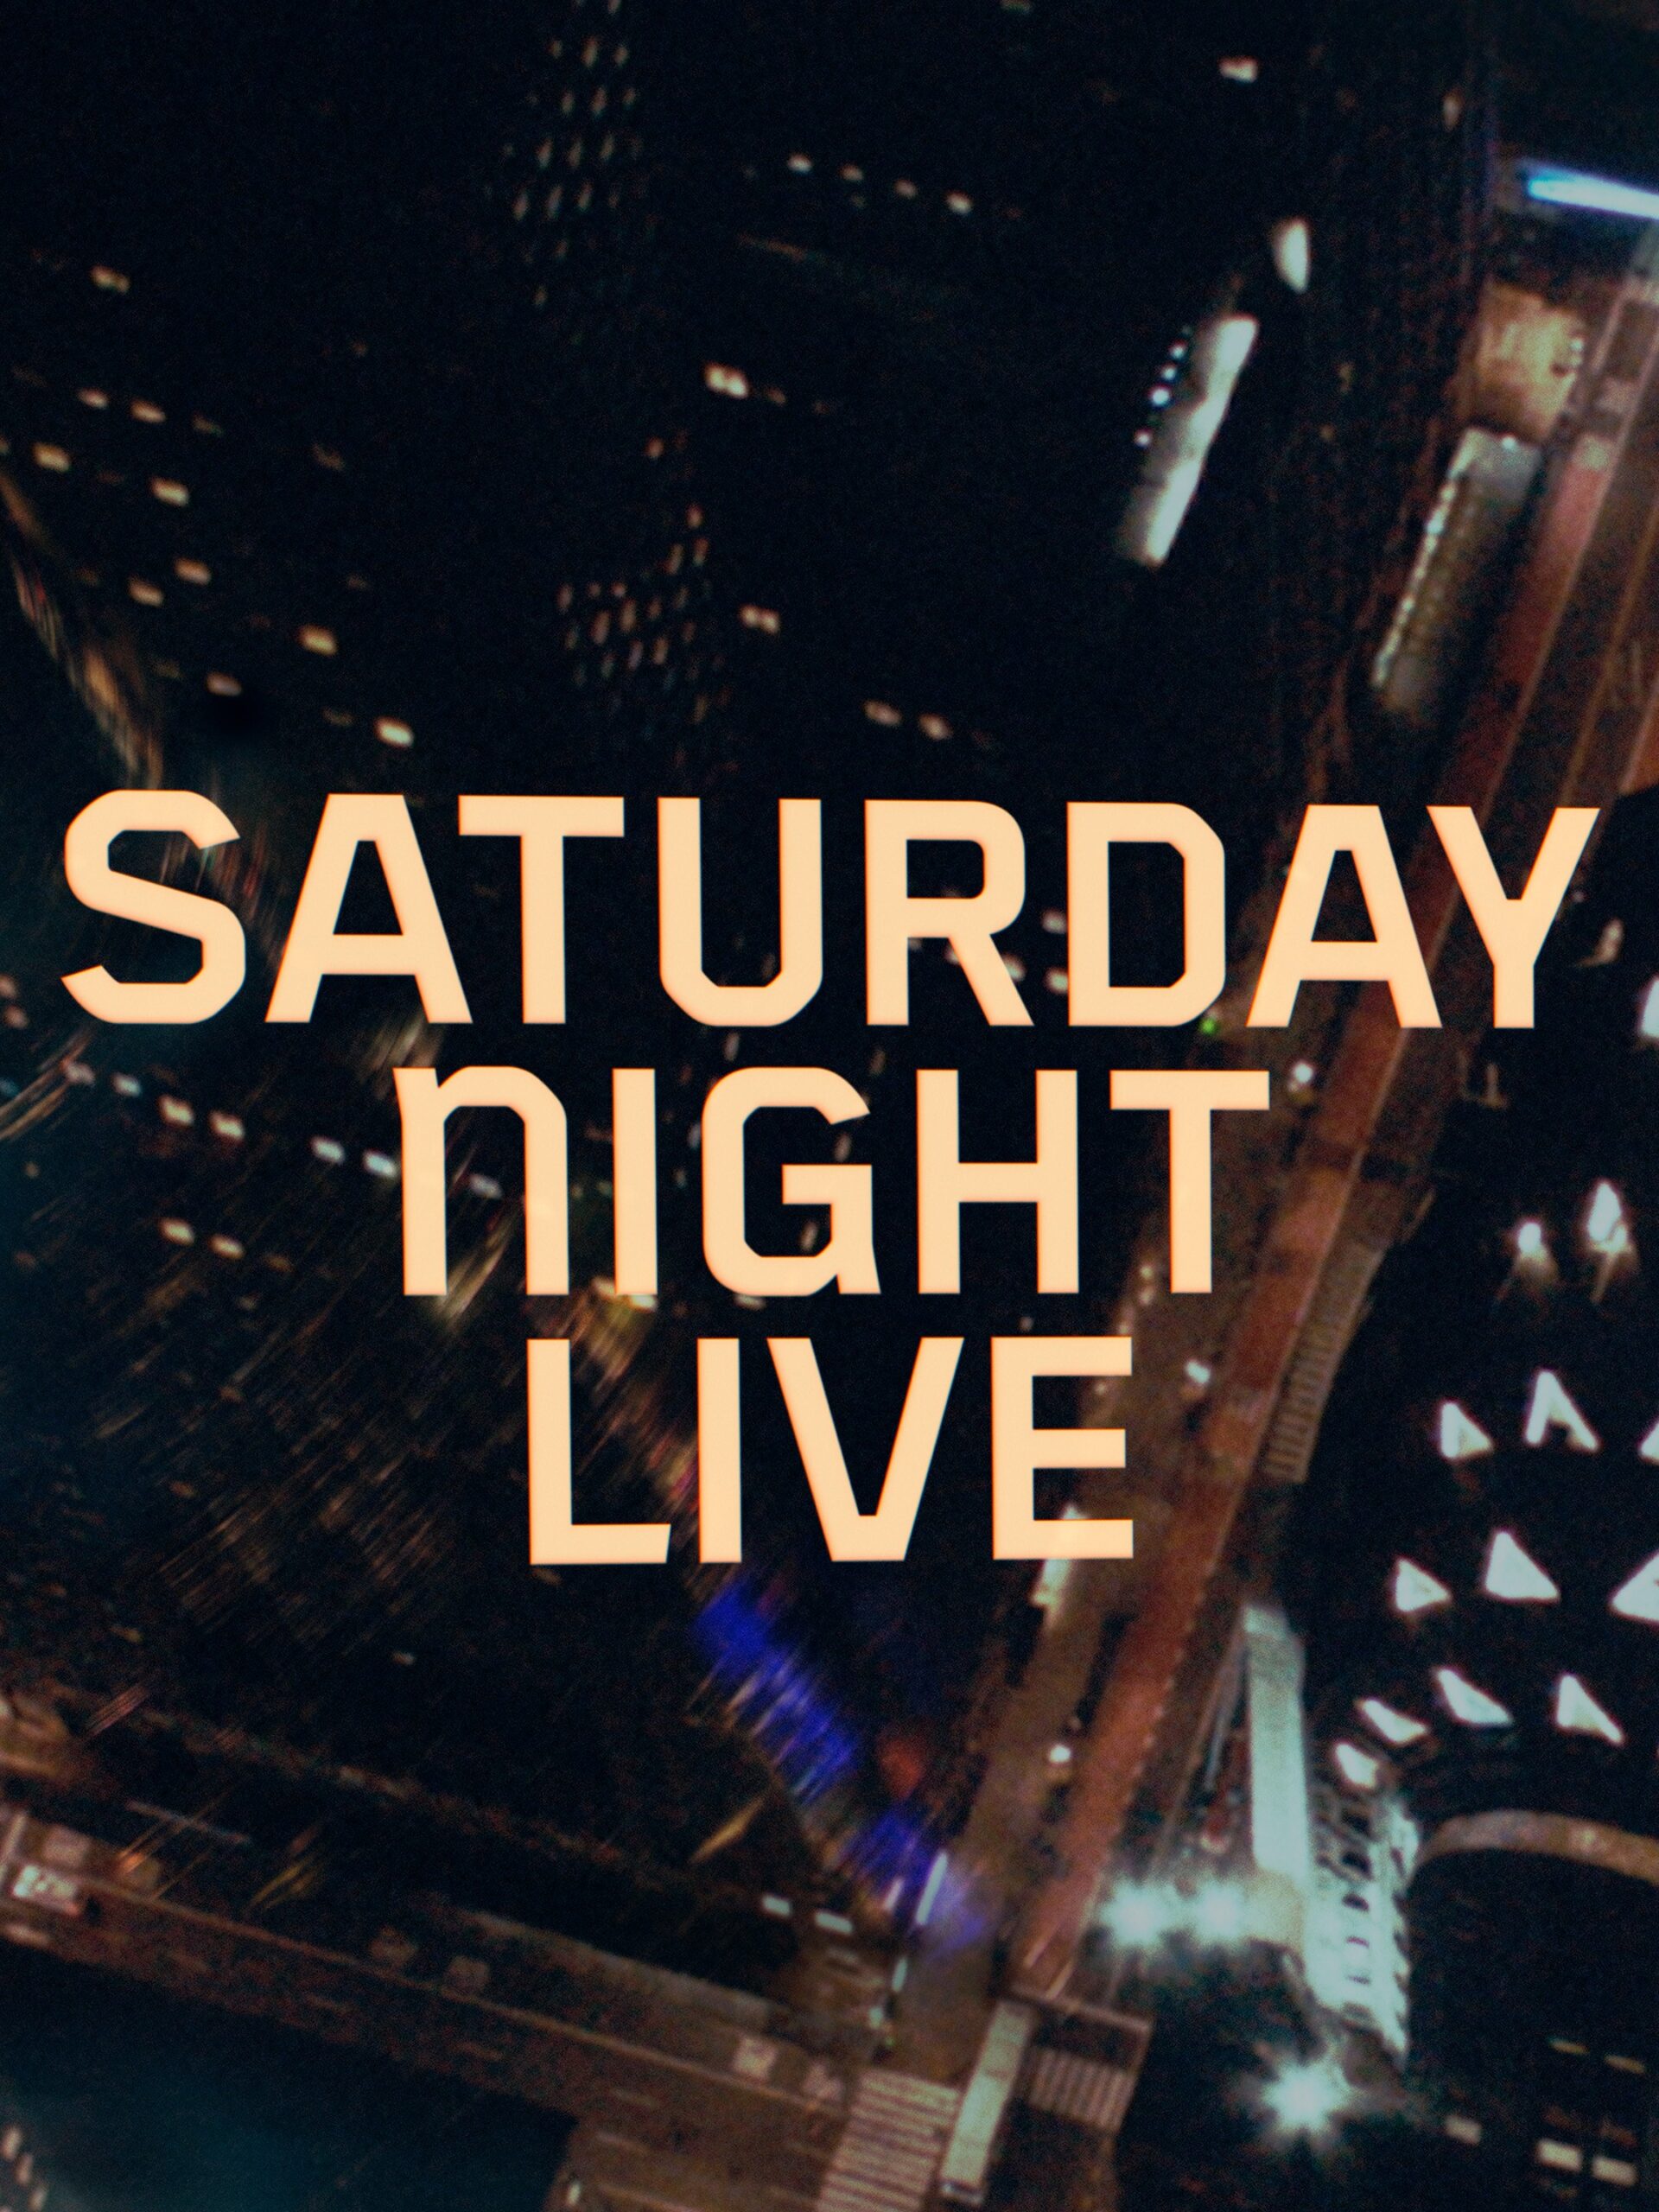 SNL Continues With Original Episodes on Feb. 3 with Host Ayo Edebiri & Musical Guest Jennifer Lopez